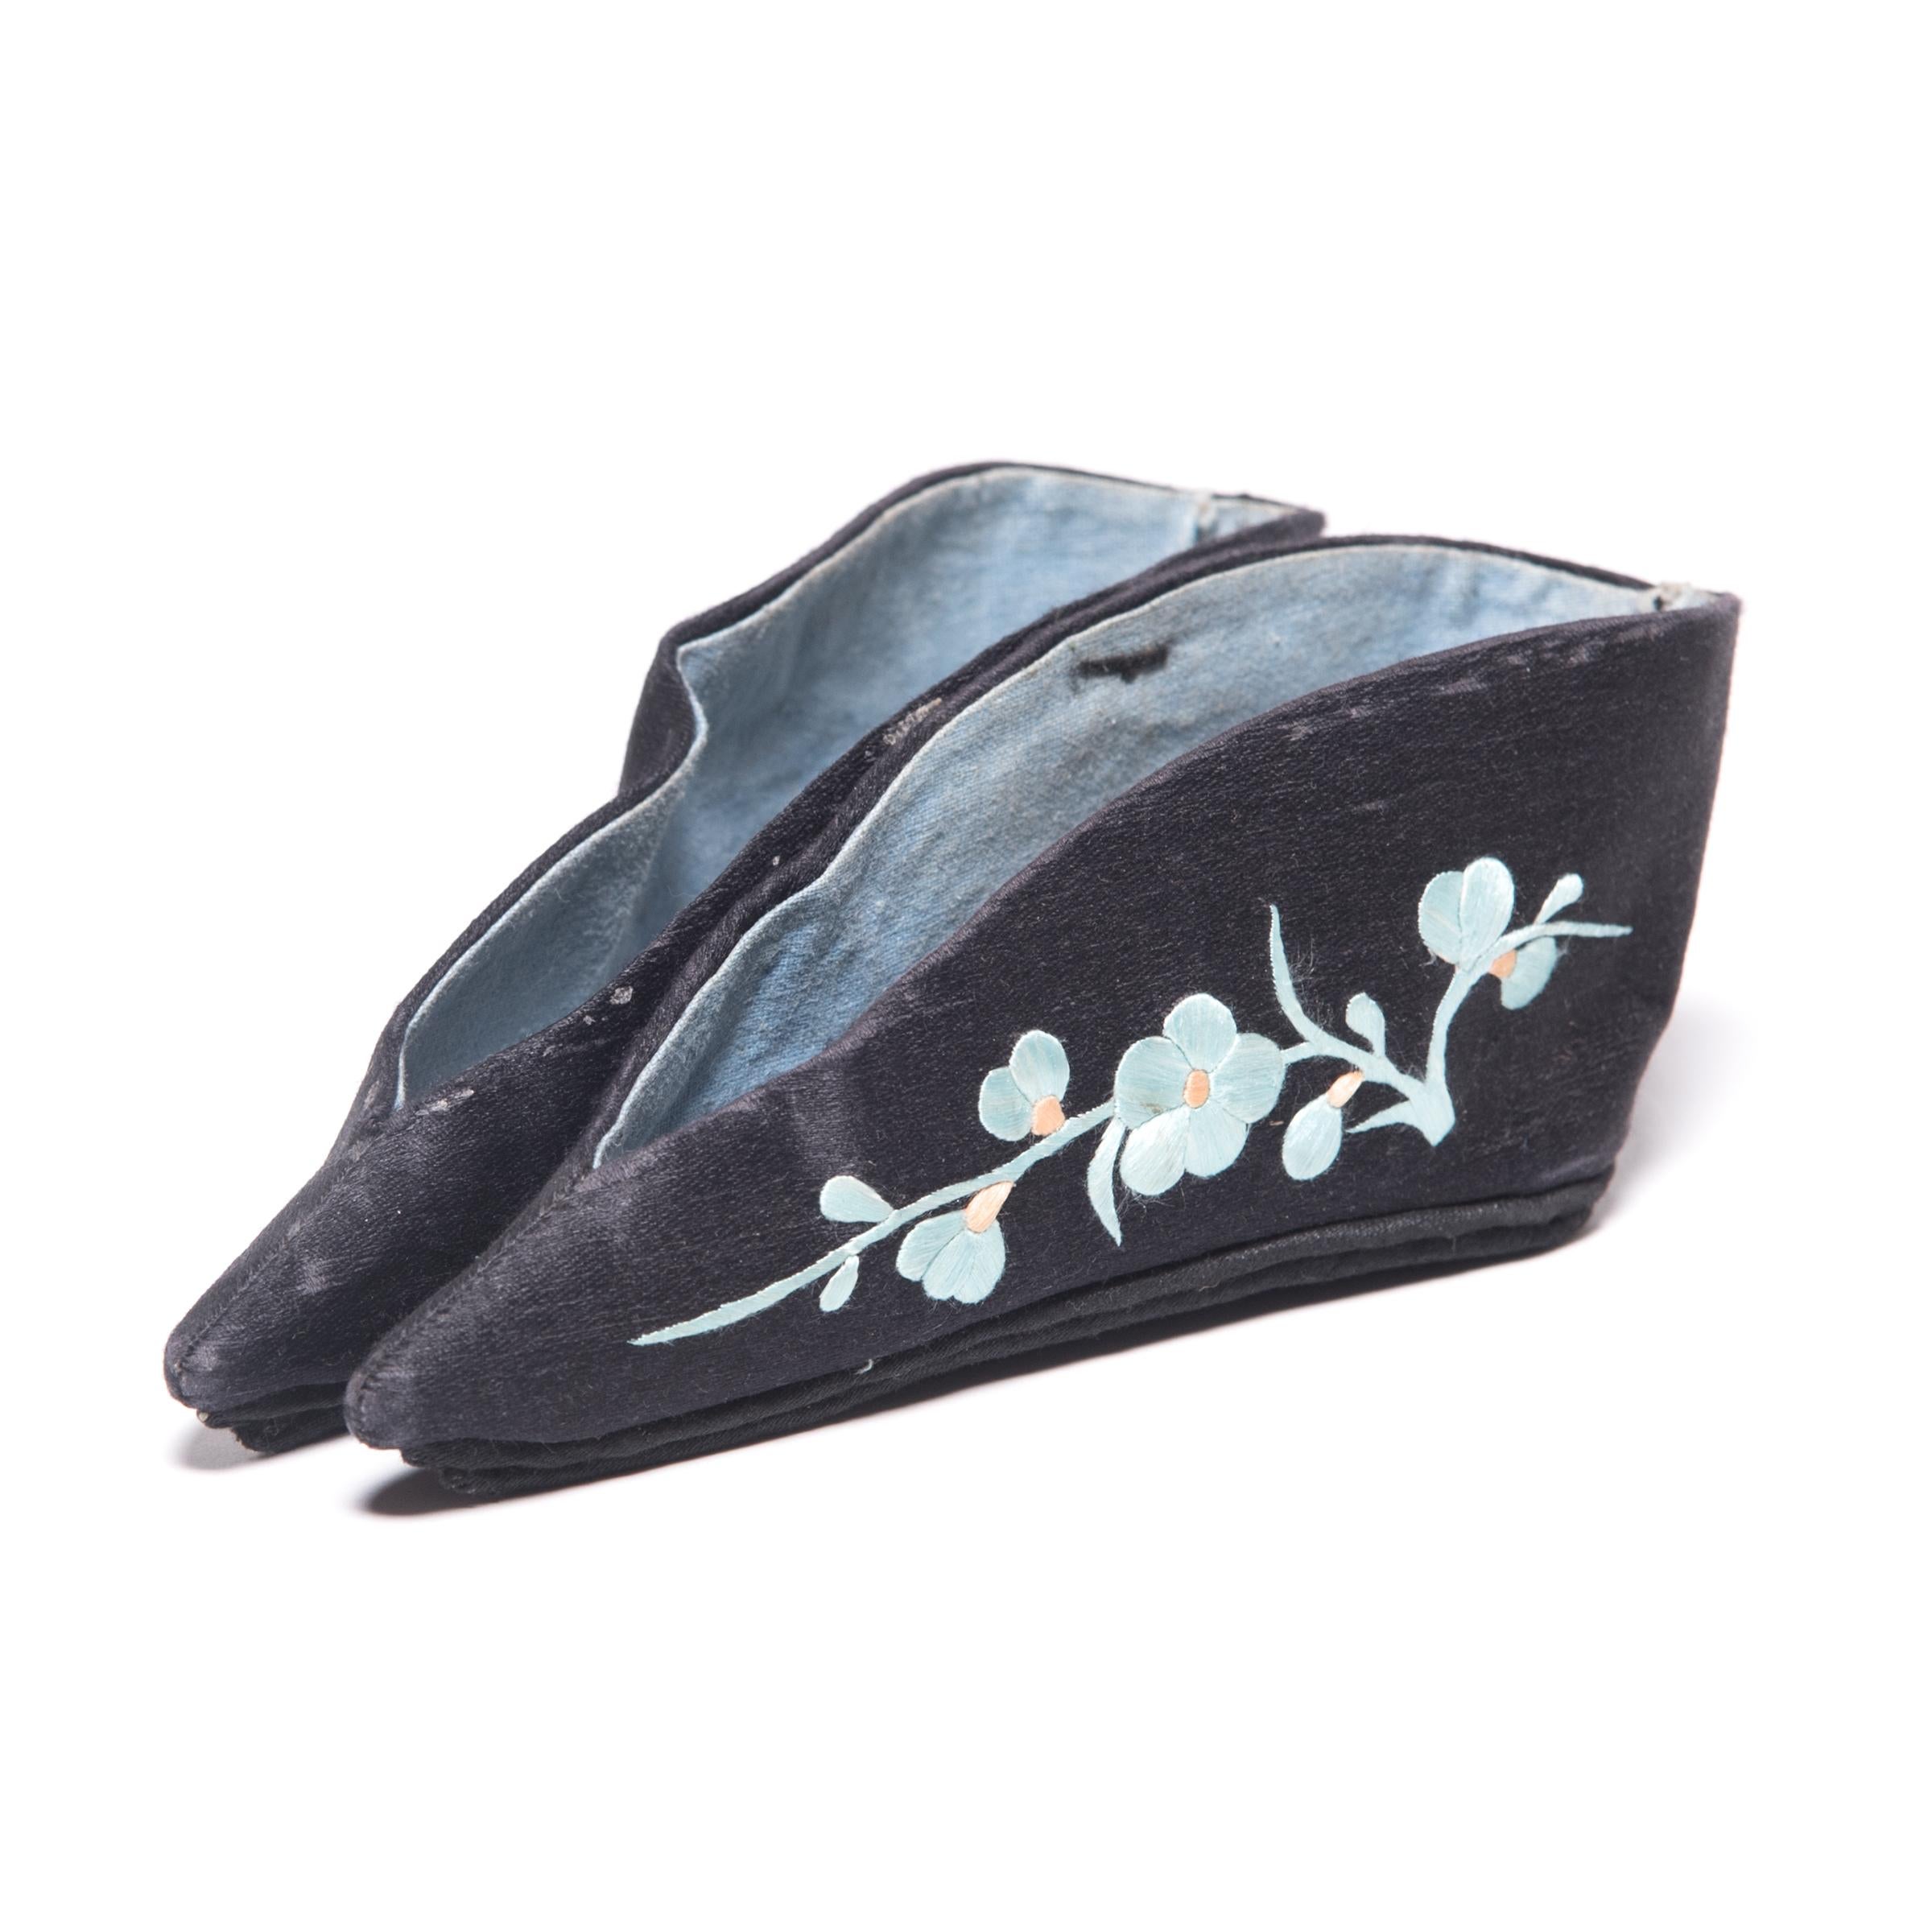 These pointed slippers, beautifully embroidered with light blue plum blossoms on black silk, were shaped to resemble a lotus bud and enhanced the diminutive shape of bound feet. A practice that began in the Tang dynasty and reached the height of its